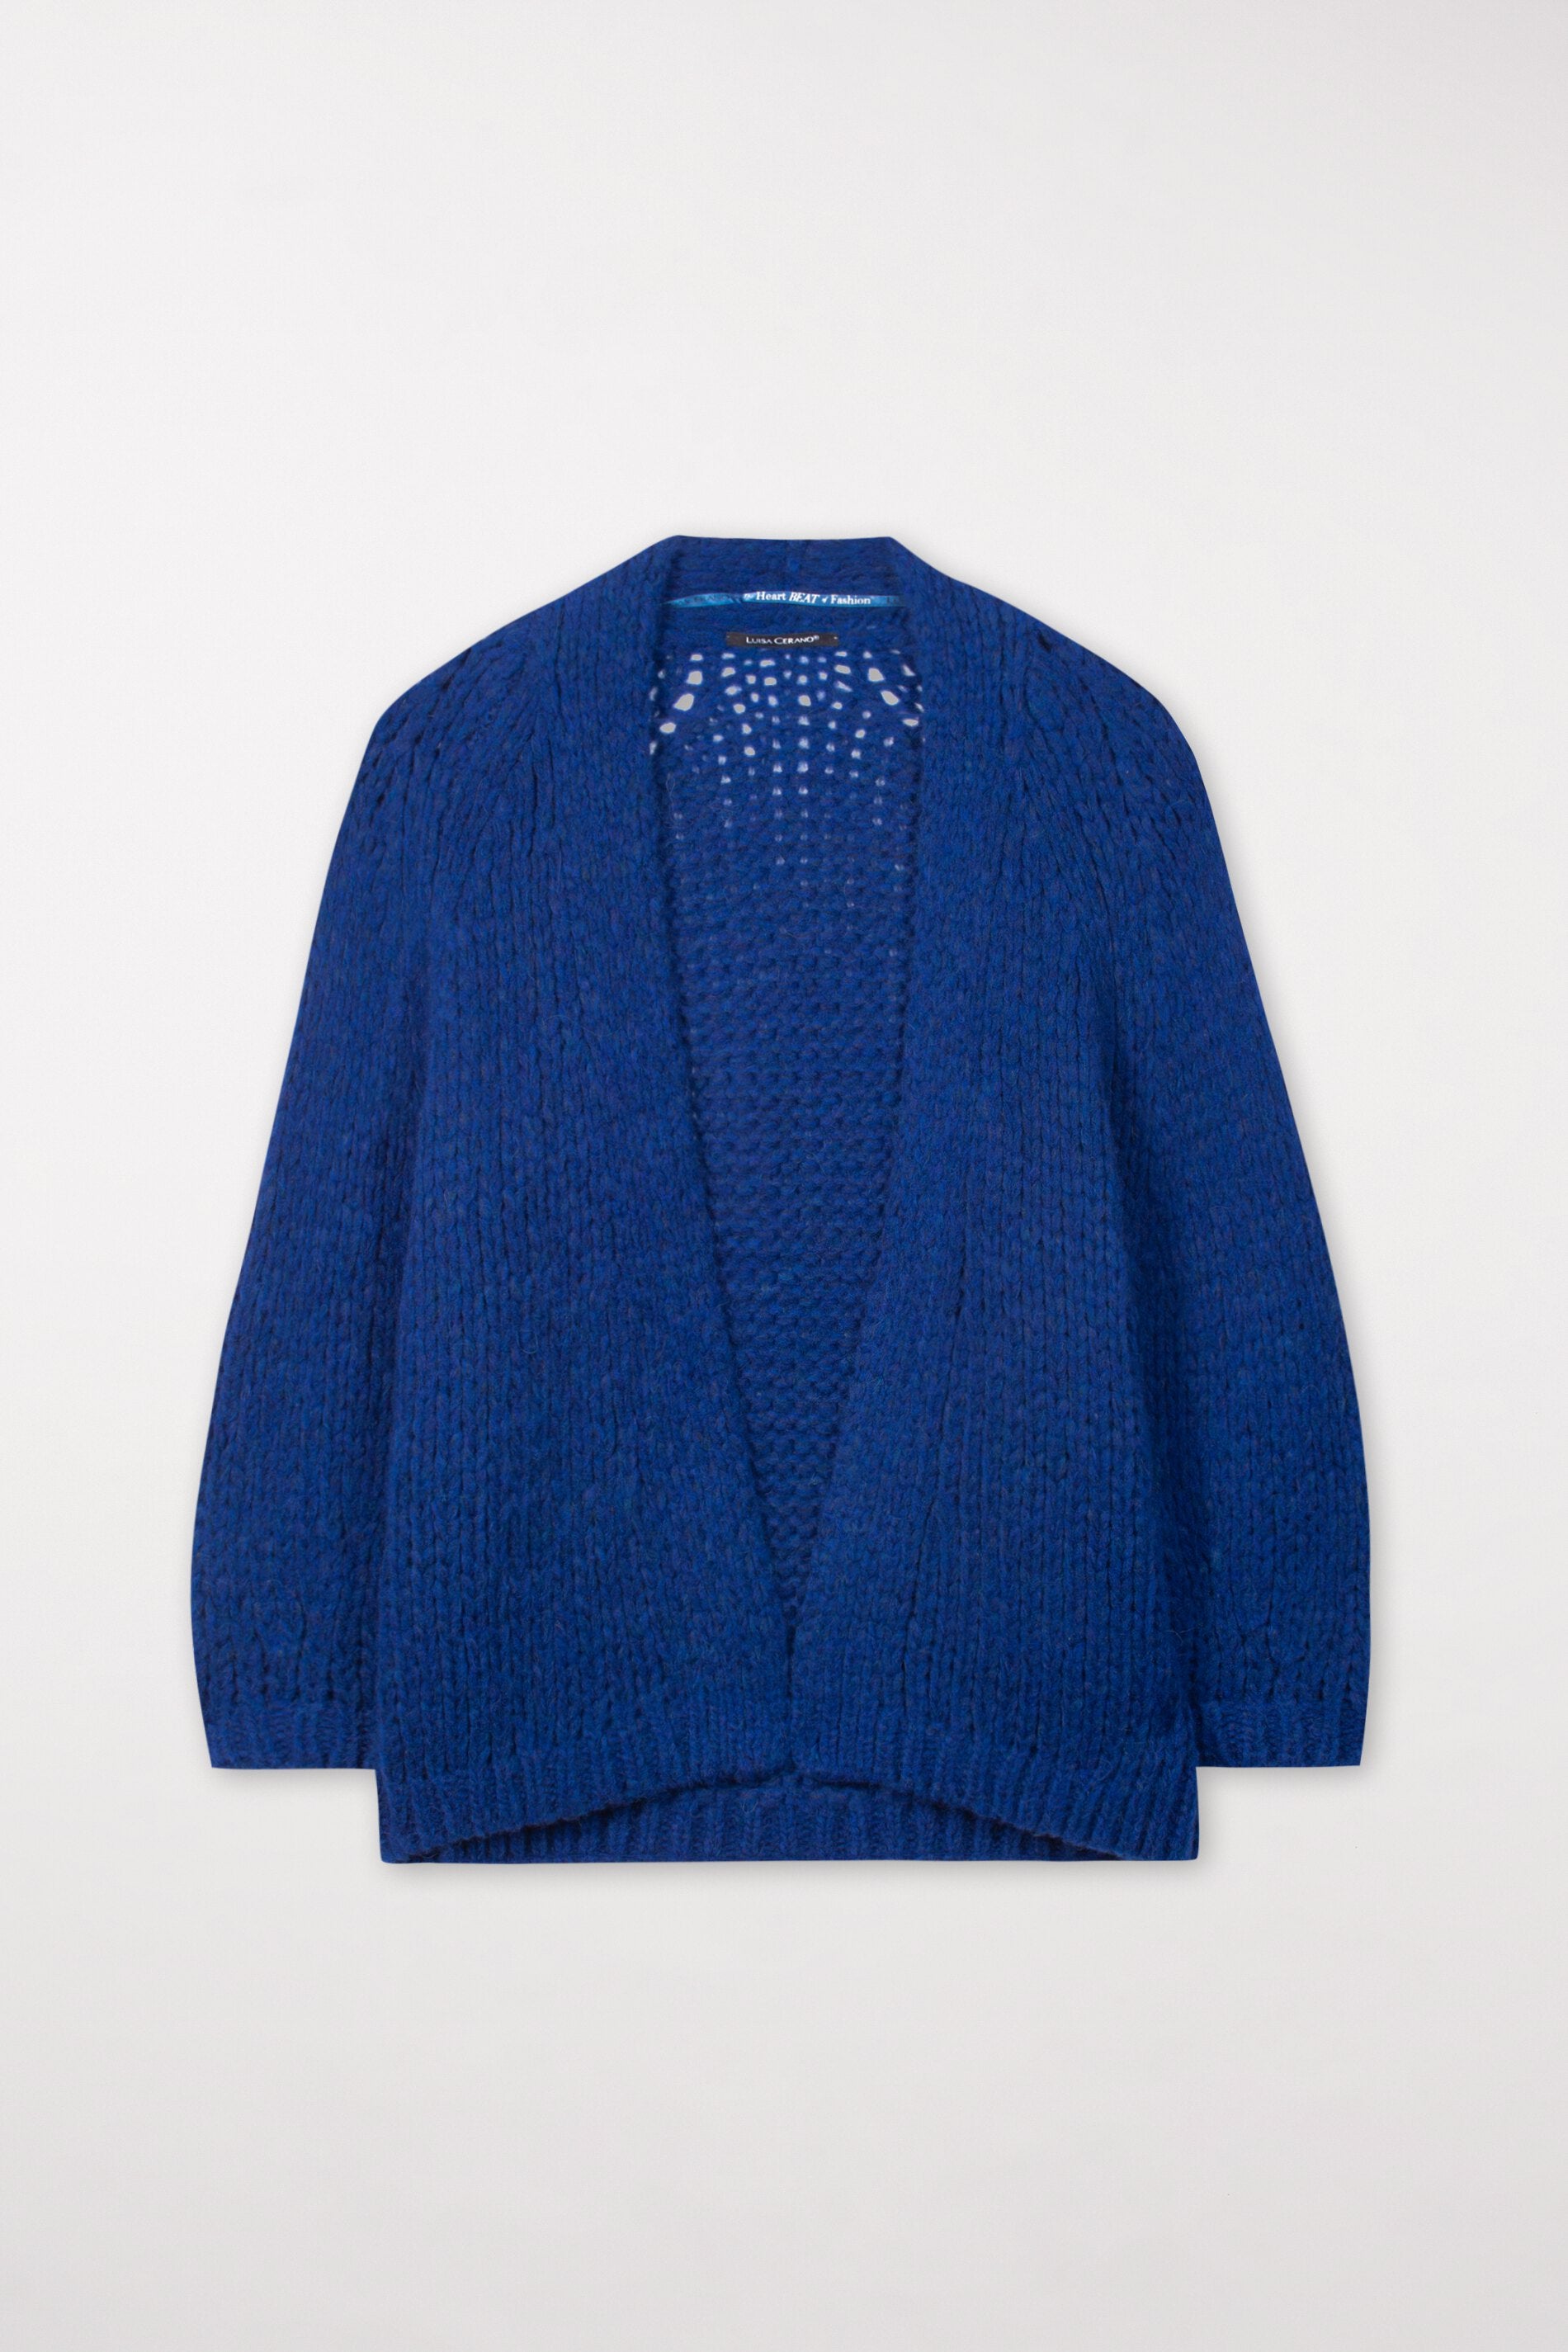 LUISA CERANO-OUTLET-SALE-Cardigan aus Woll-Mix-Strick-34-signal blue-by-ARCHIVIST